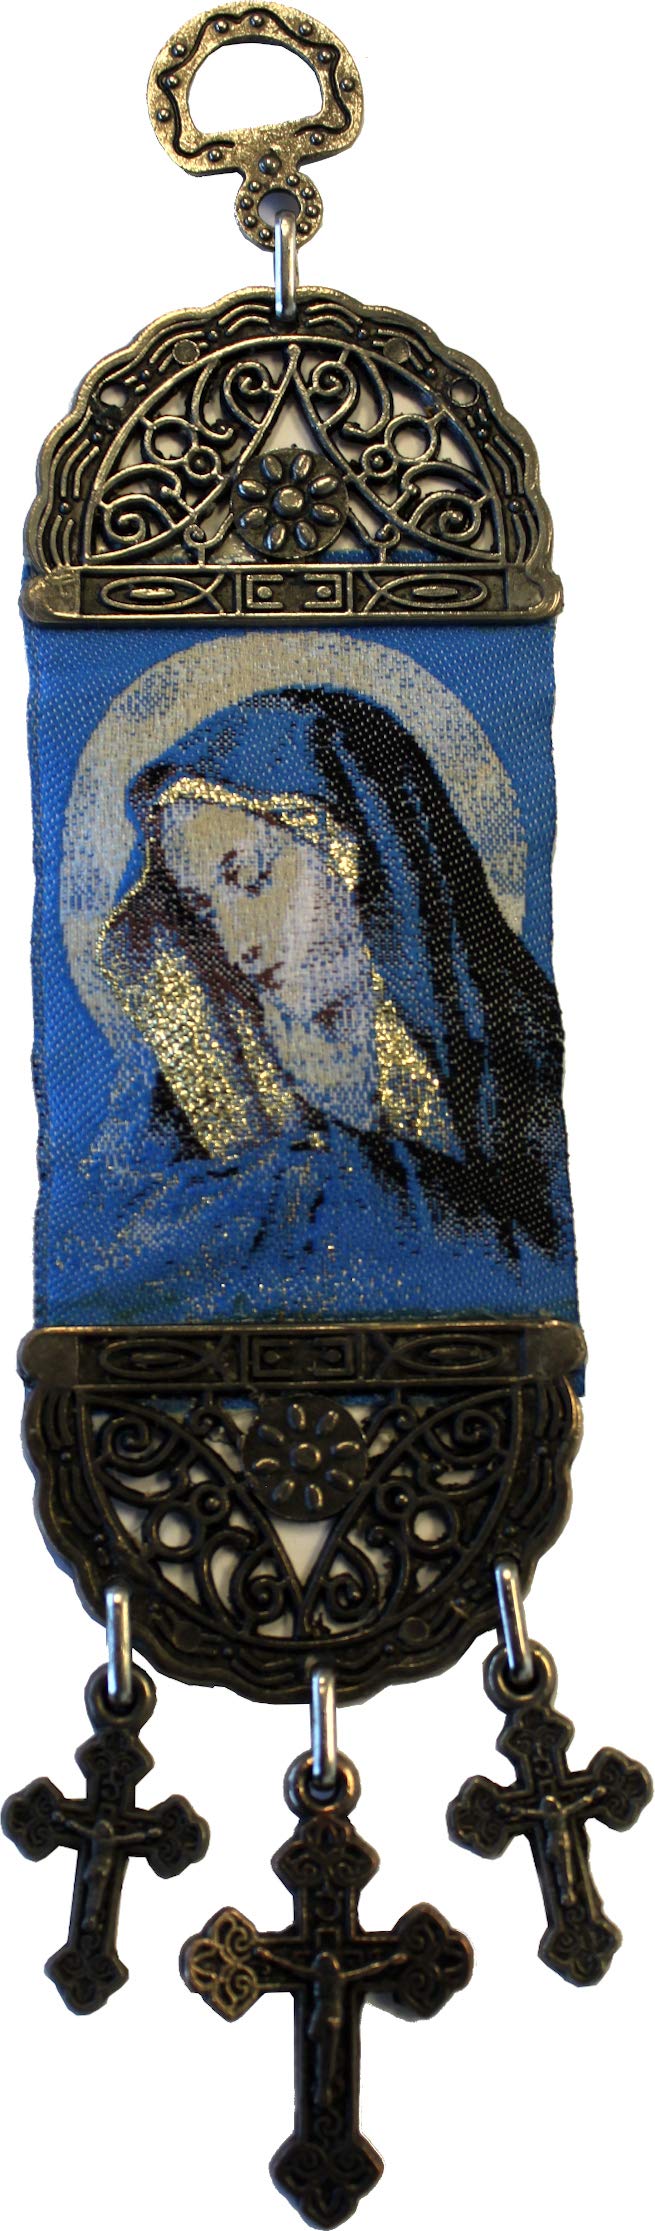 Holy Land Market Wall Hanging Tapestry of The Blessed Mother Mary - with Heat Printing on Synthetic Cloth Decorated - Style II (8 x 2 Inches)